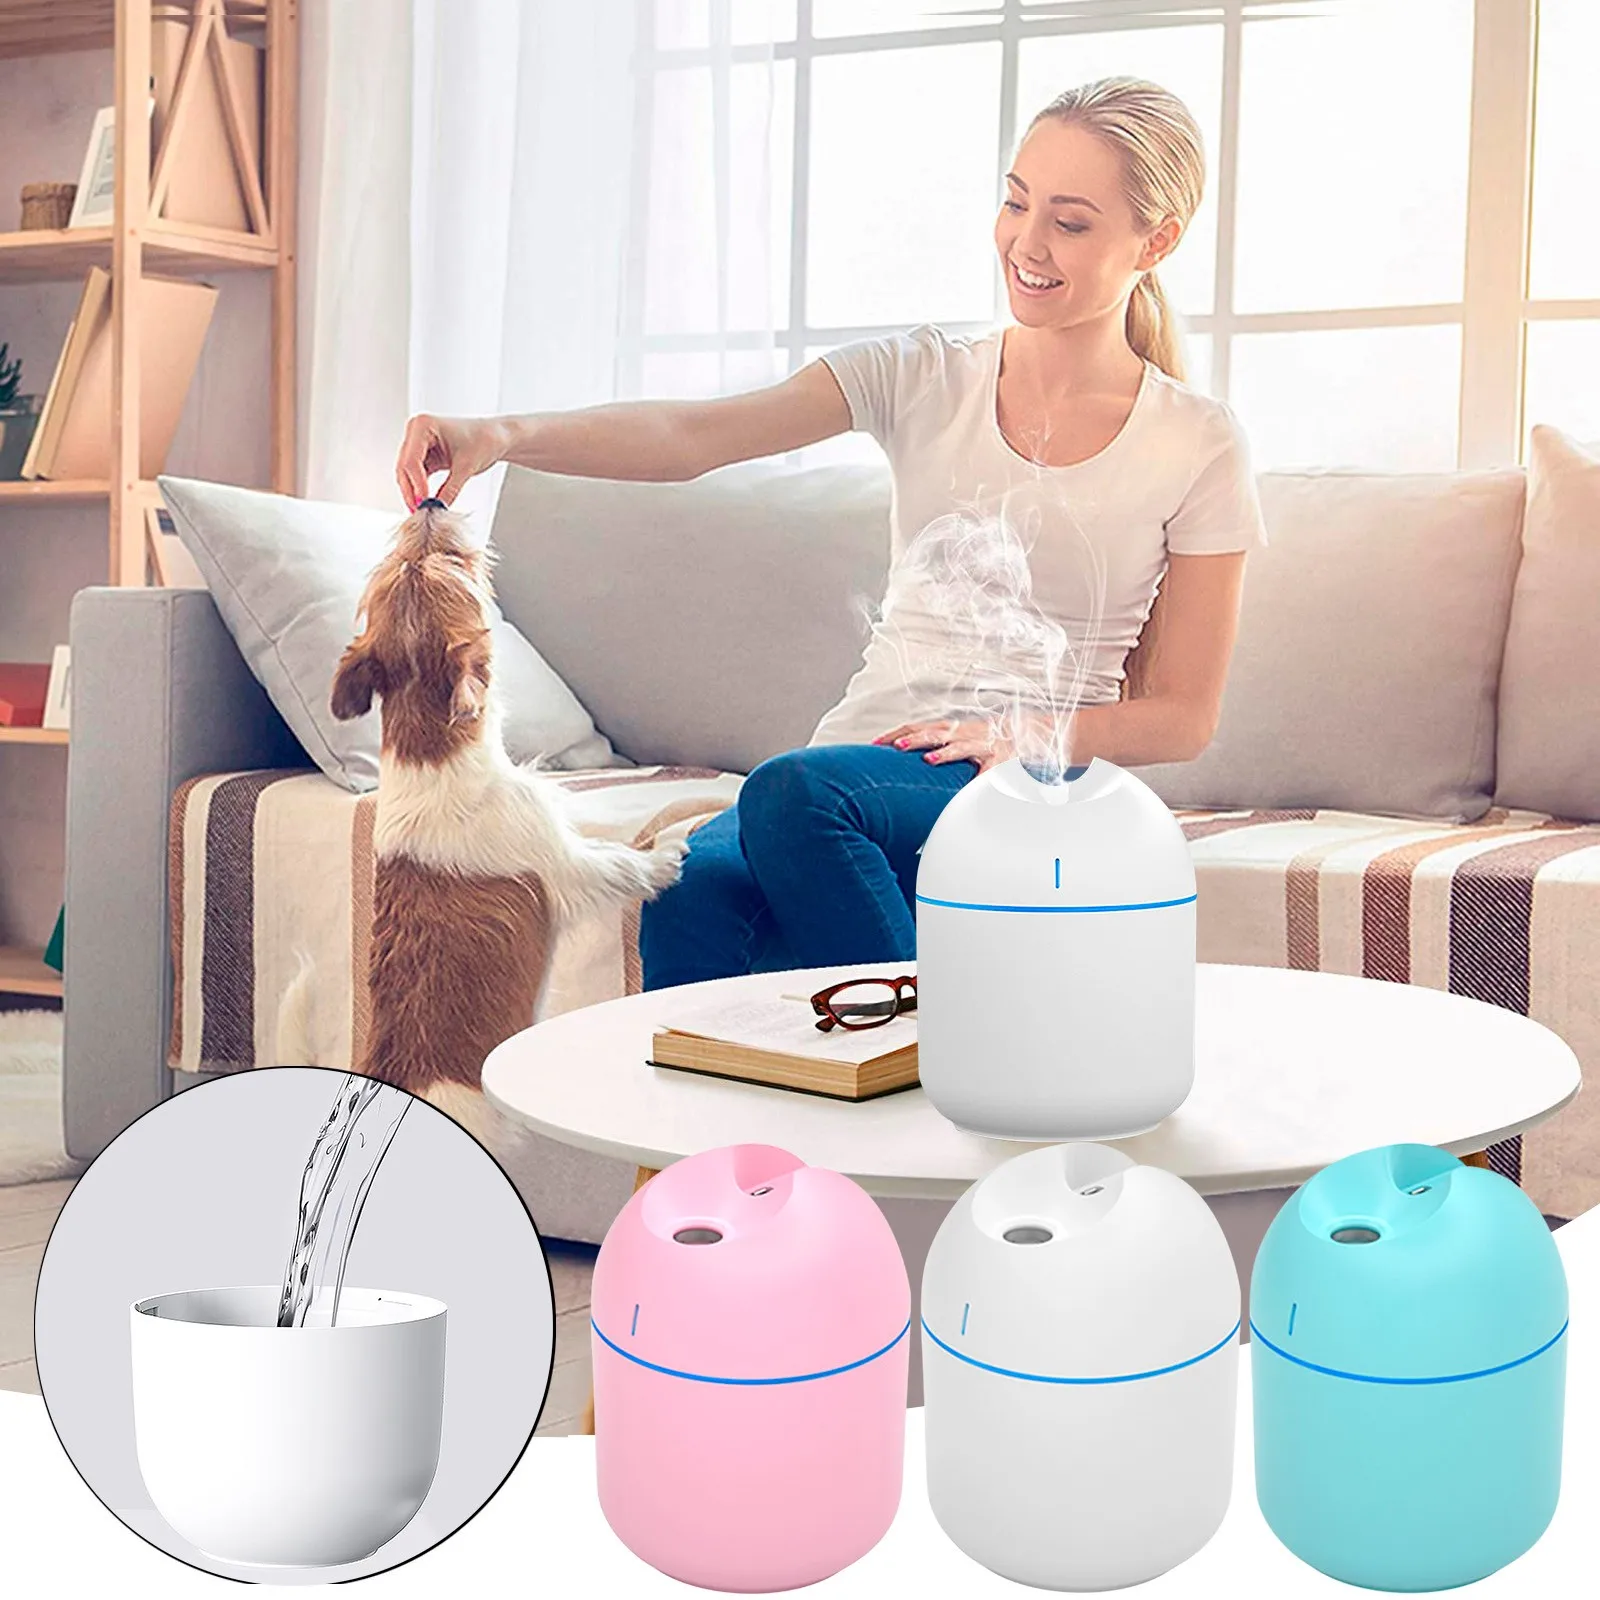 200ml Nano Spray Colorful Light Lasting Battery Life Silent Car Household Humidifier Usb Diffusers Air Fresher For Home#c#c